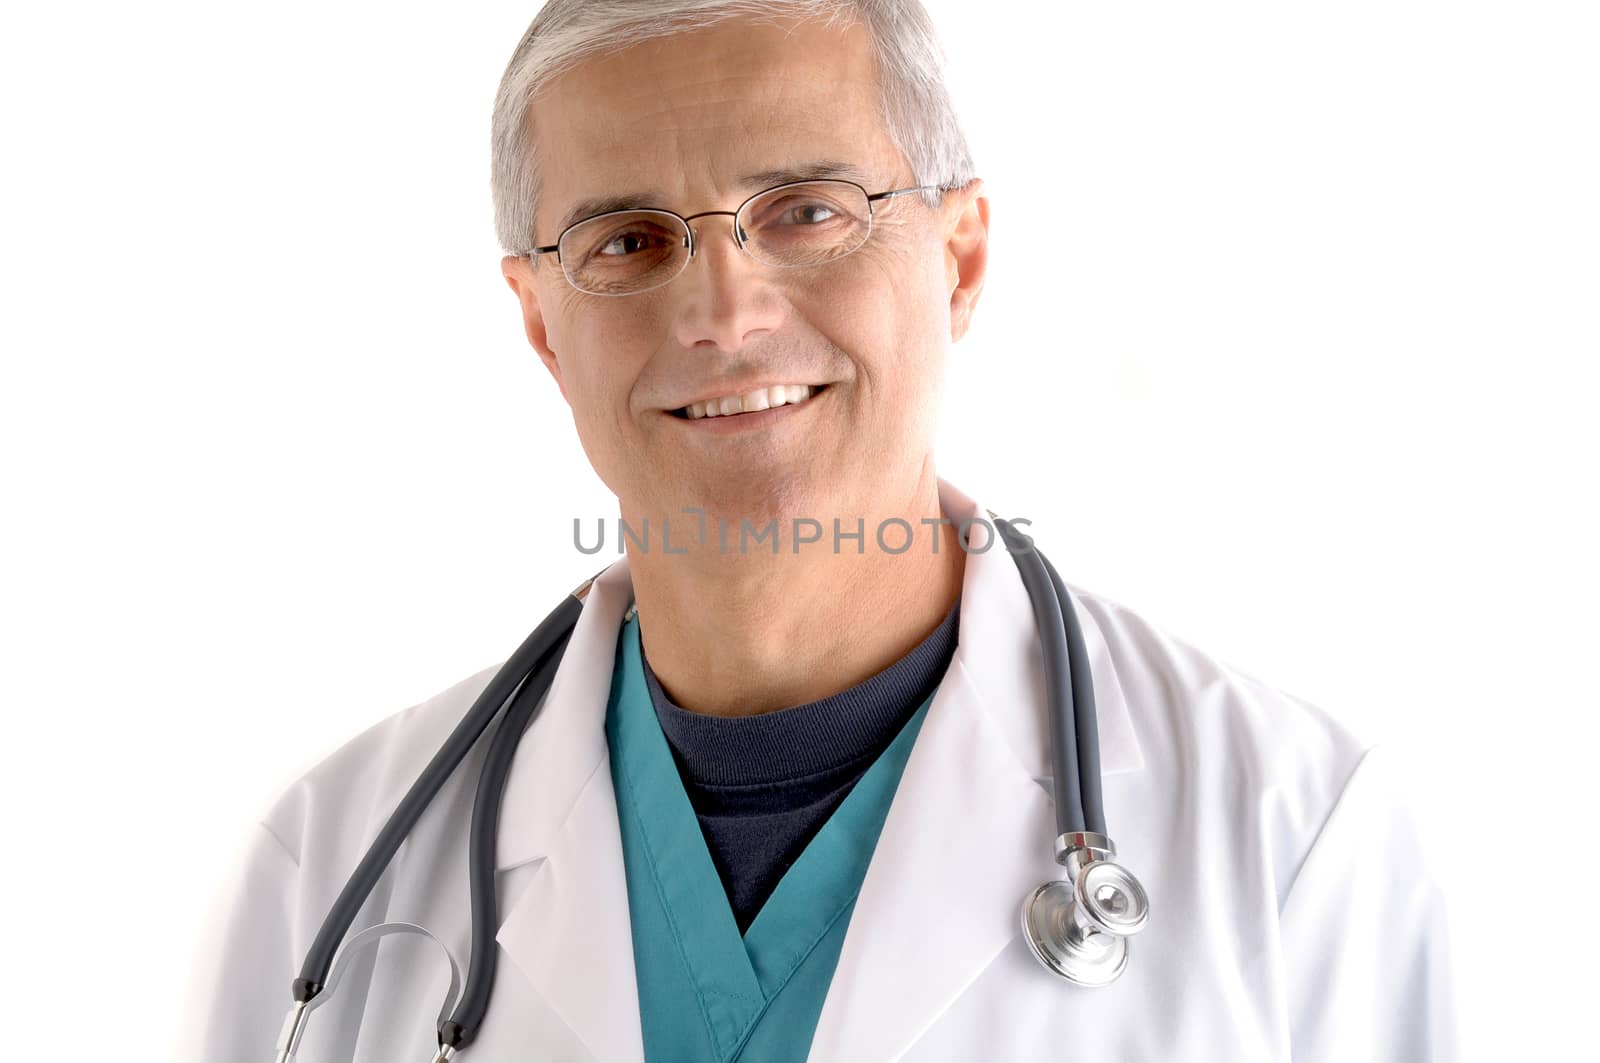 Portrait of a Middle aged doctor in scrubs and lab coat and stethoscope draped around his neck. Isolated on white background.